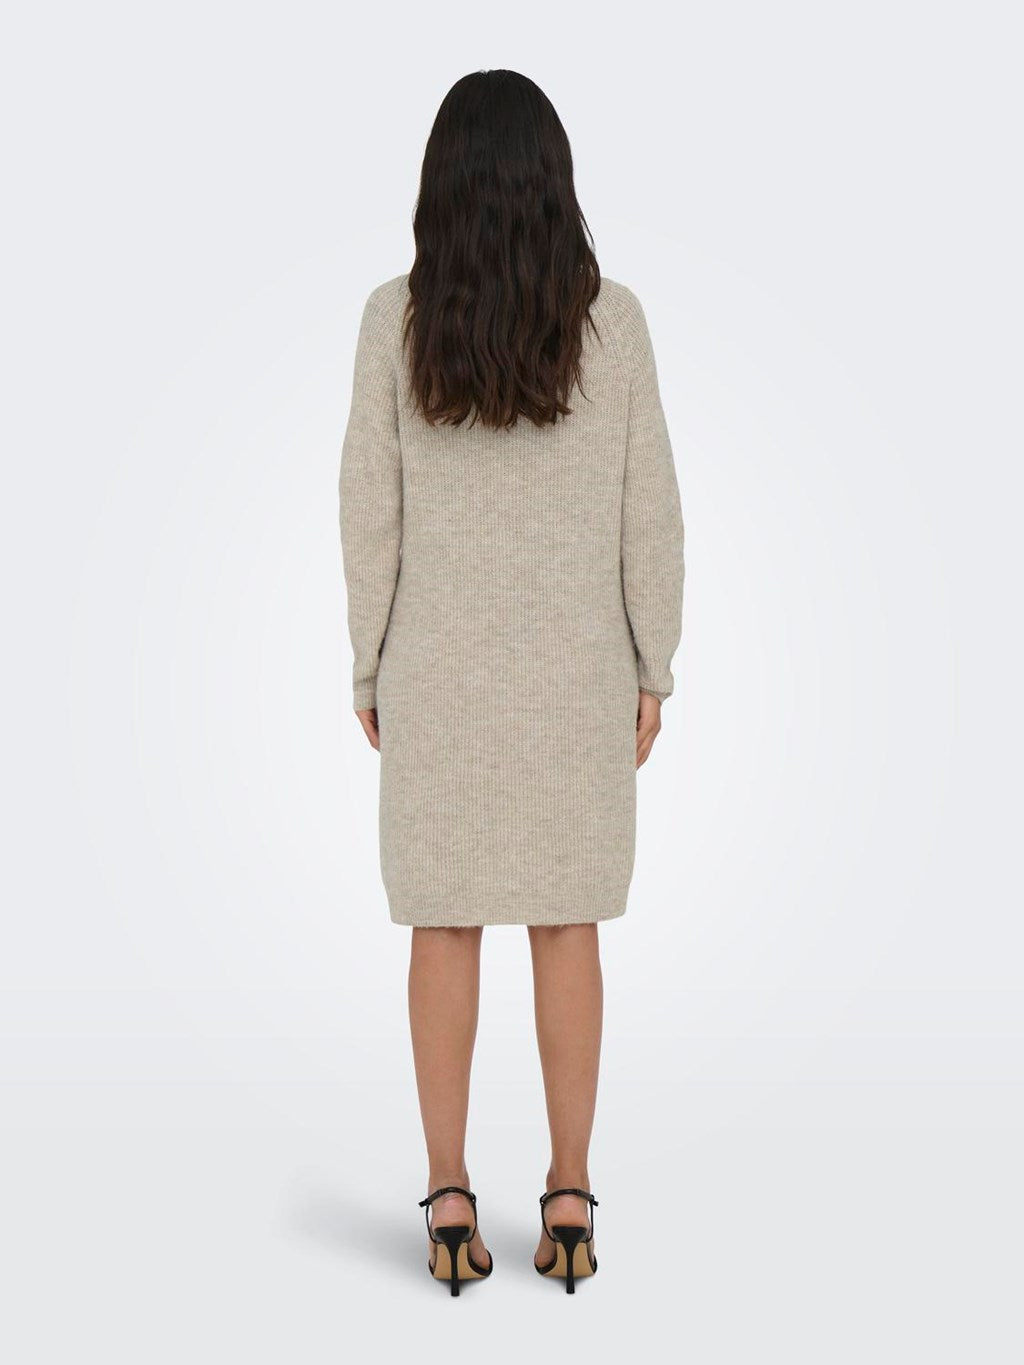 Only Carly Rollneck Dress in Pumice Stone